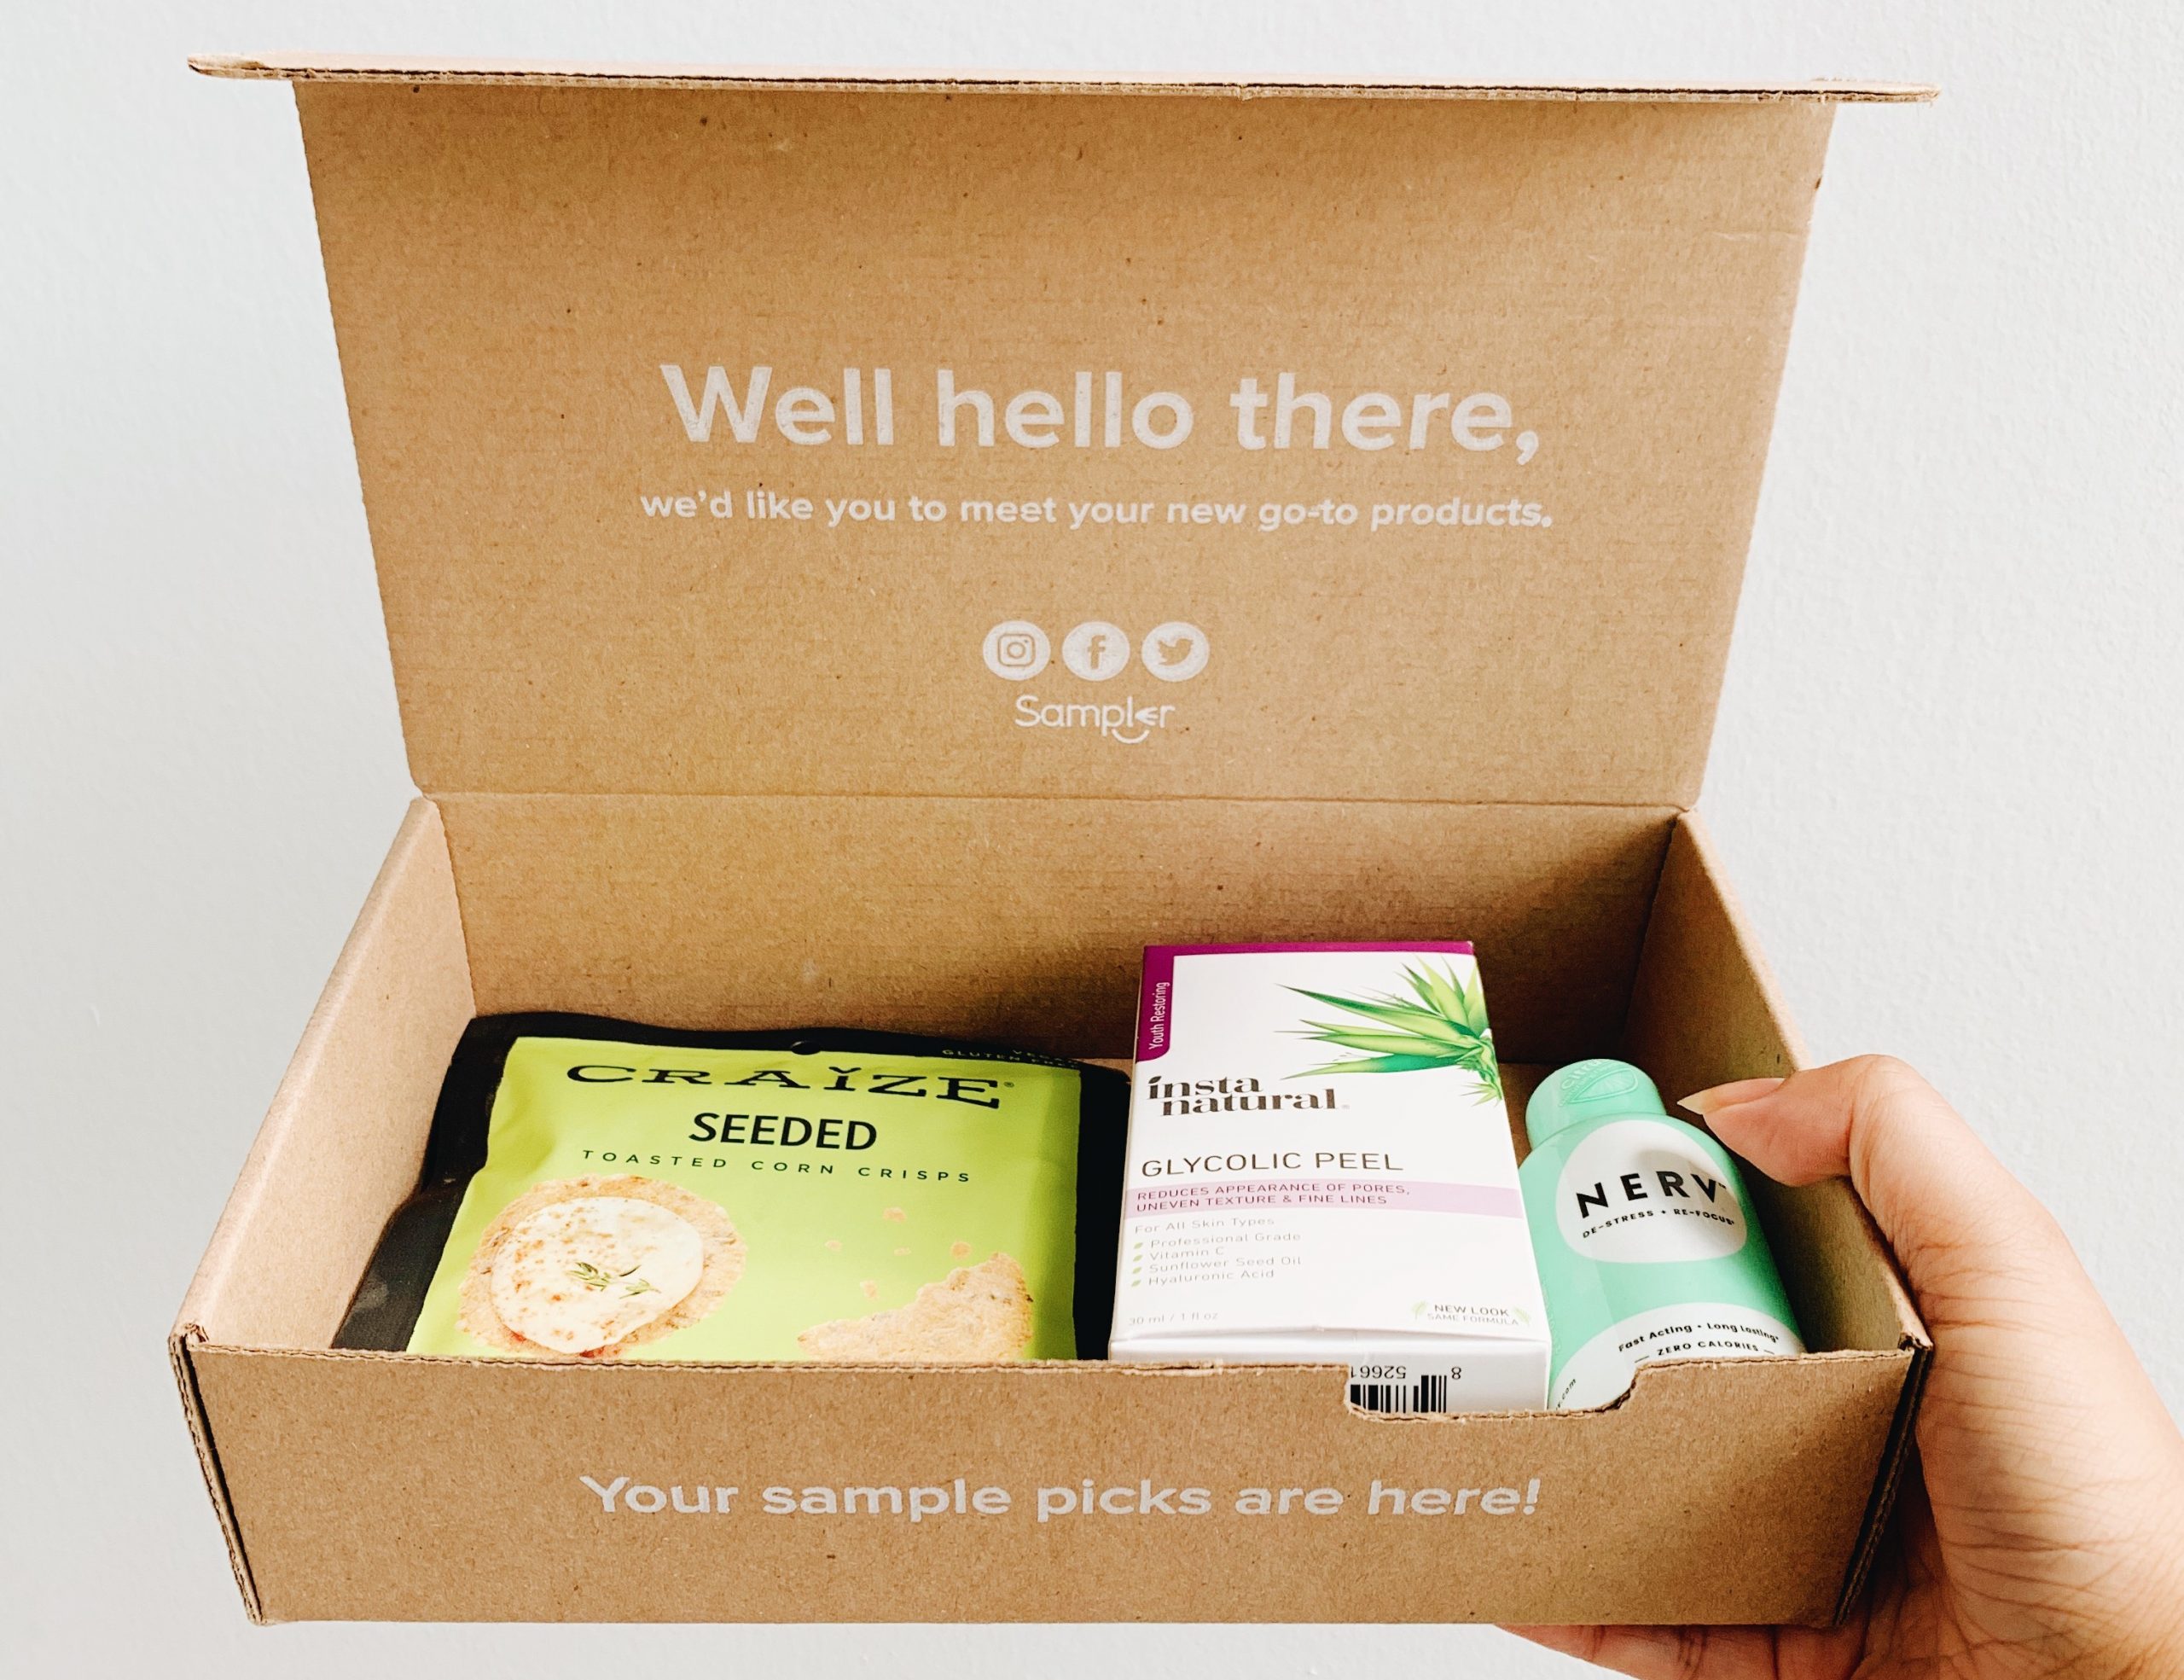 Free sample-based promotions